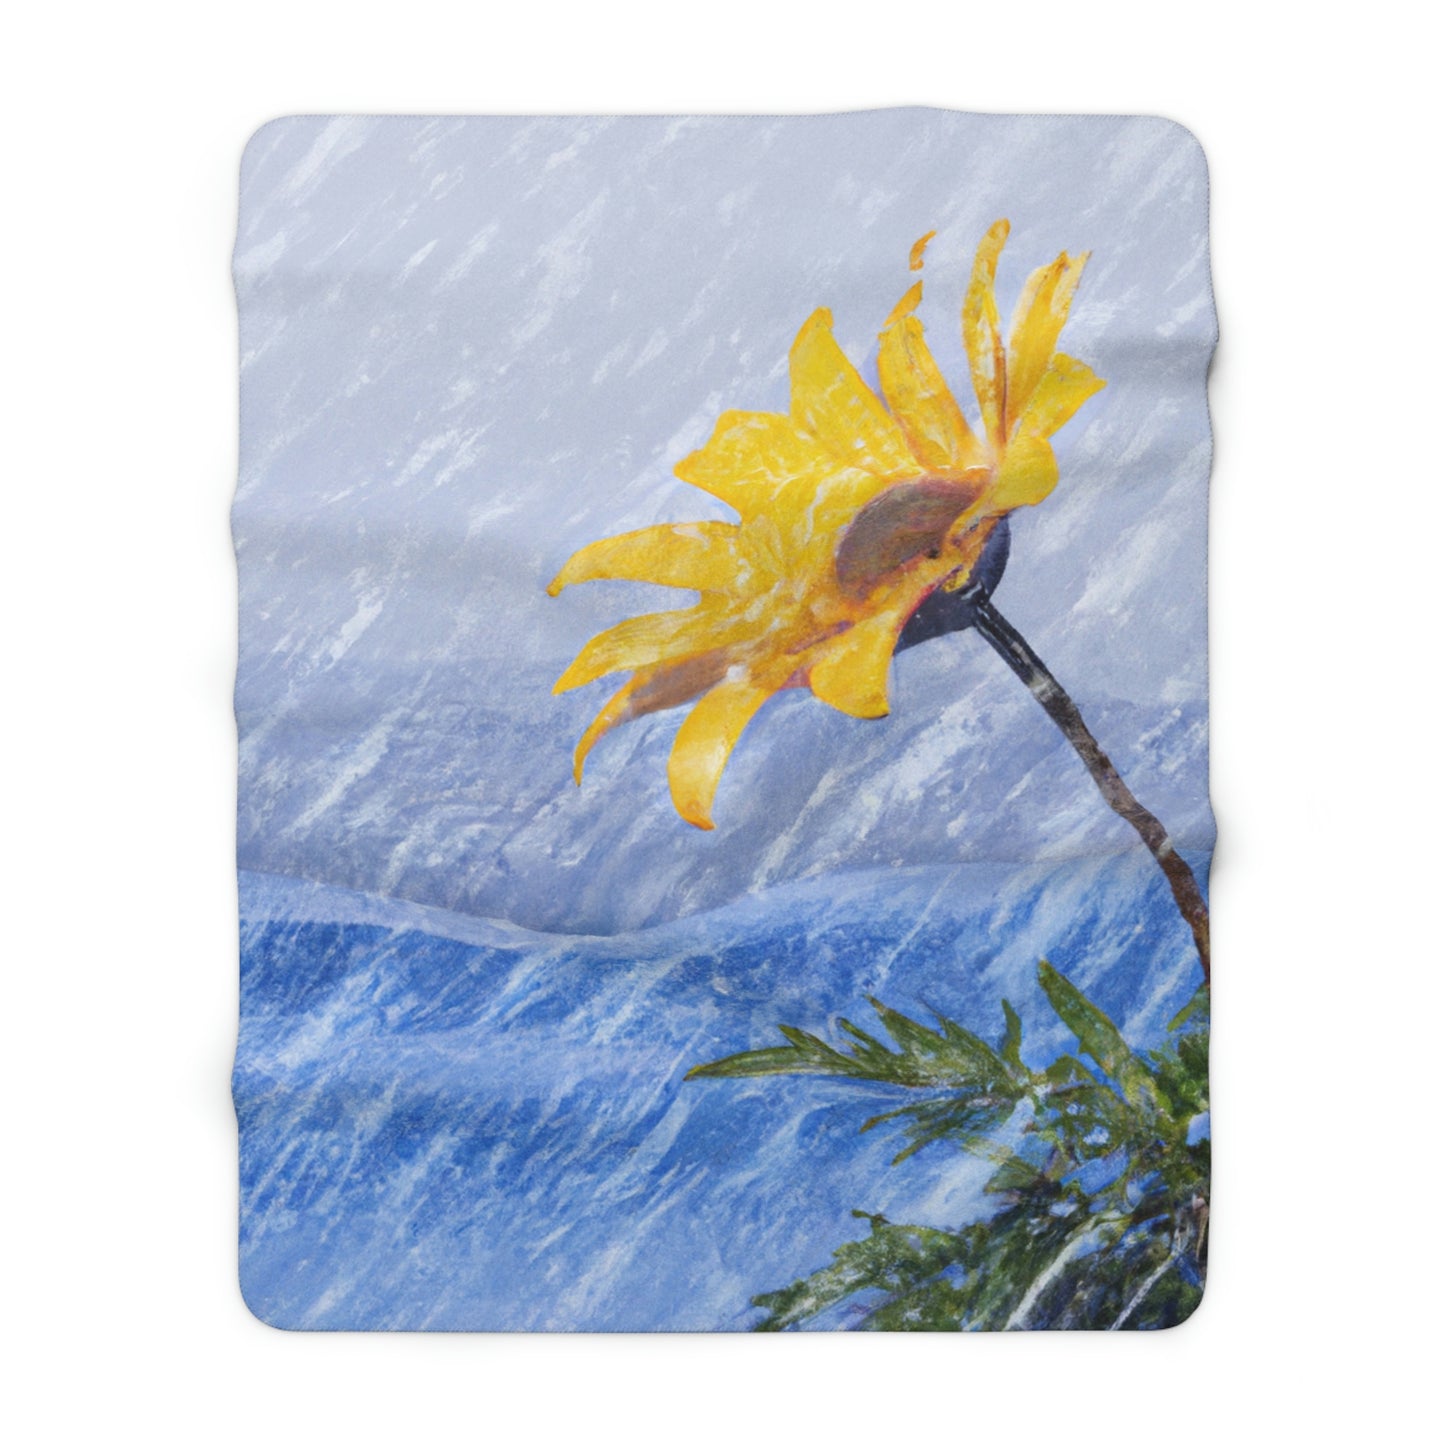 "A Burst of Color in the Glistening White: The Miracle of a Flower Blooms in a Snowstorm" - The Alien Sherpa Fleece Blanket